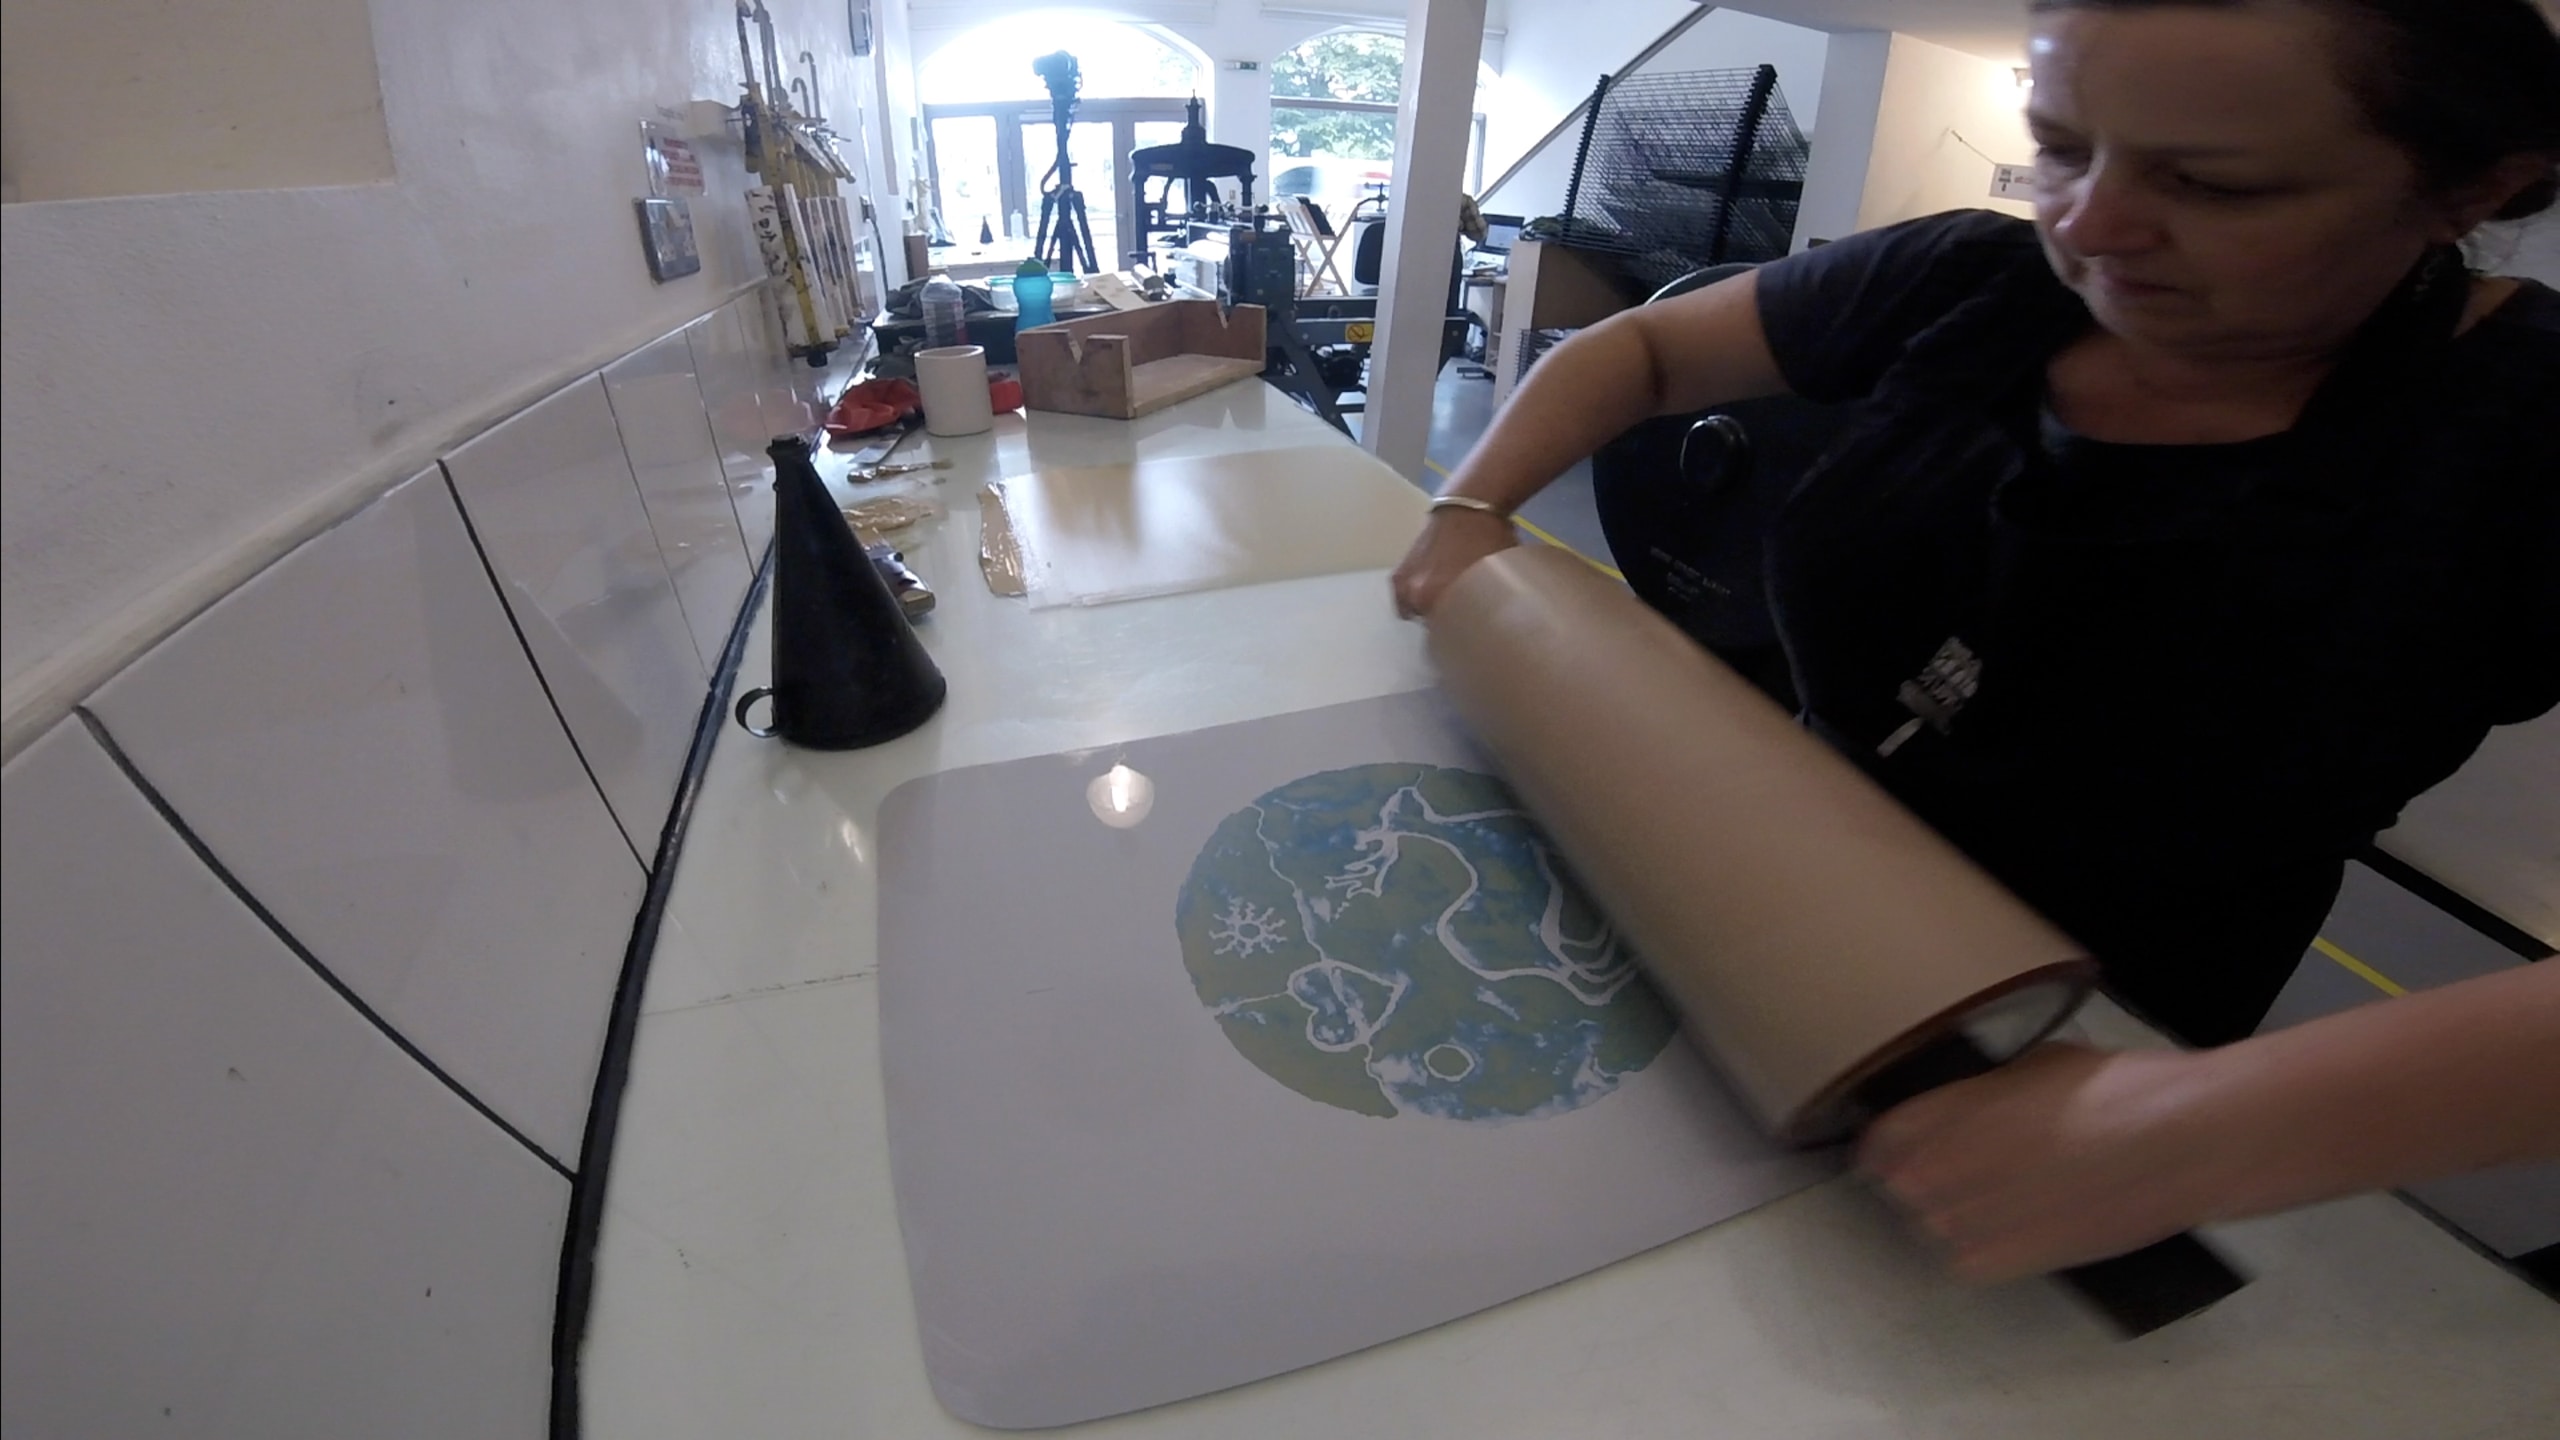 A photo lithography plate being printed by a woman rolling ink onto the stencil and paper beneath